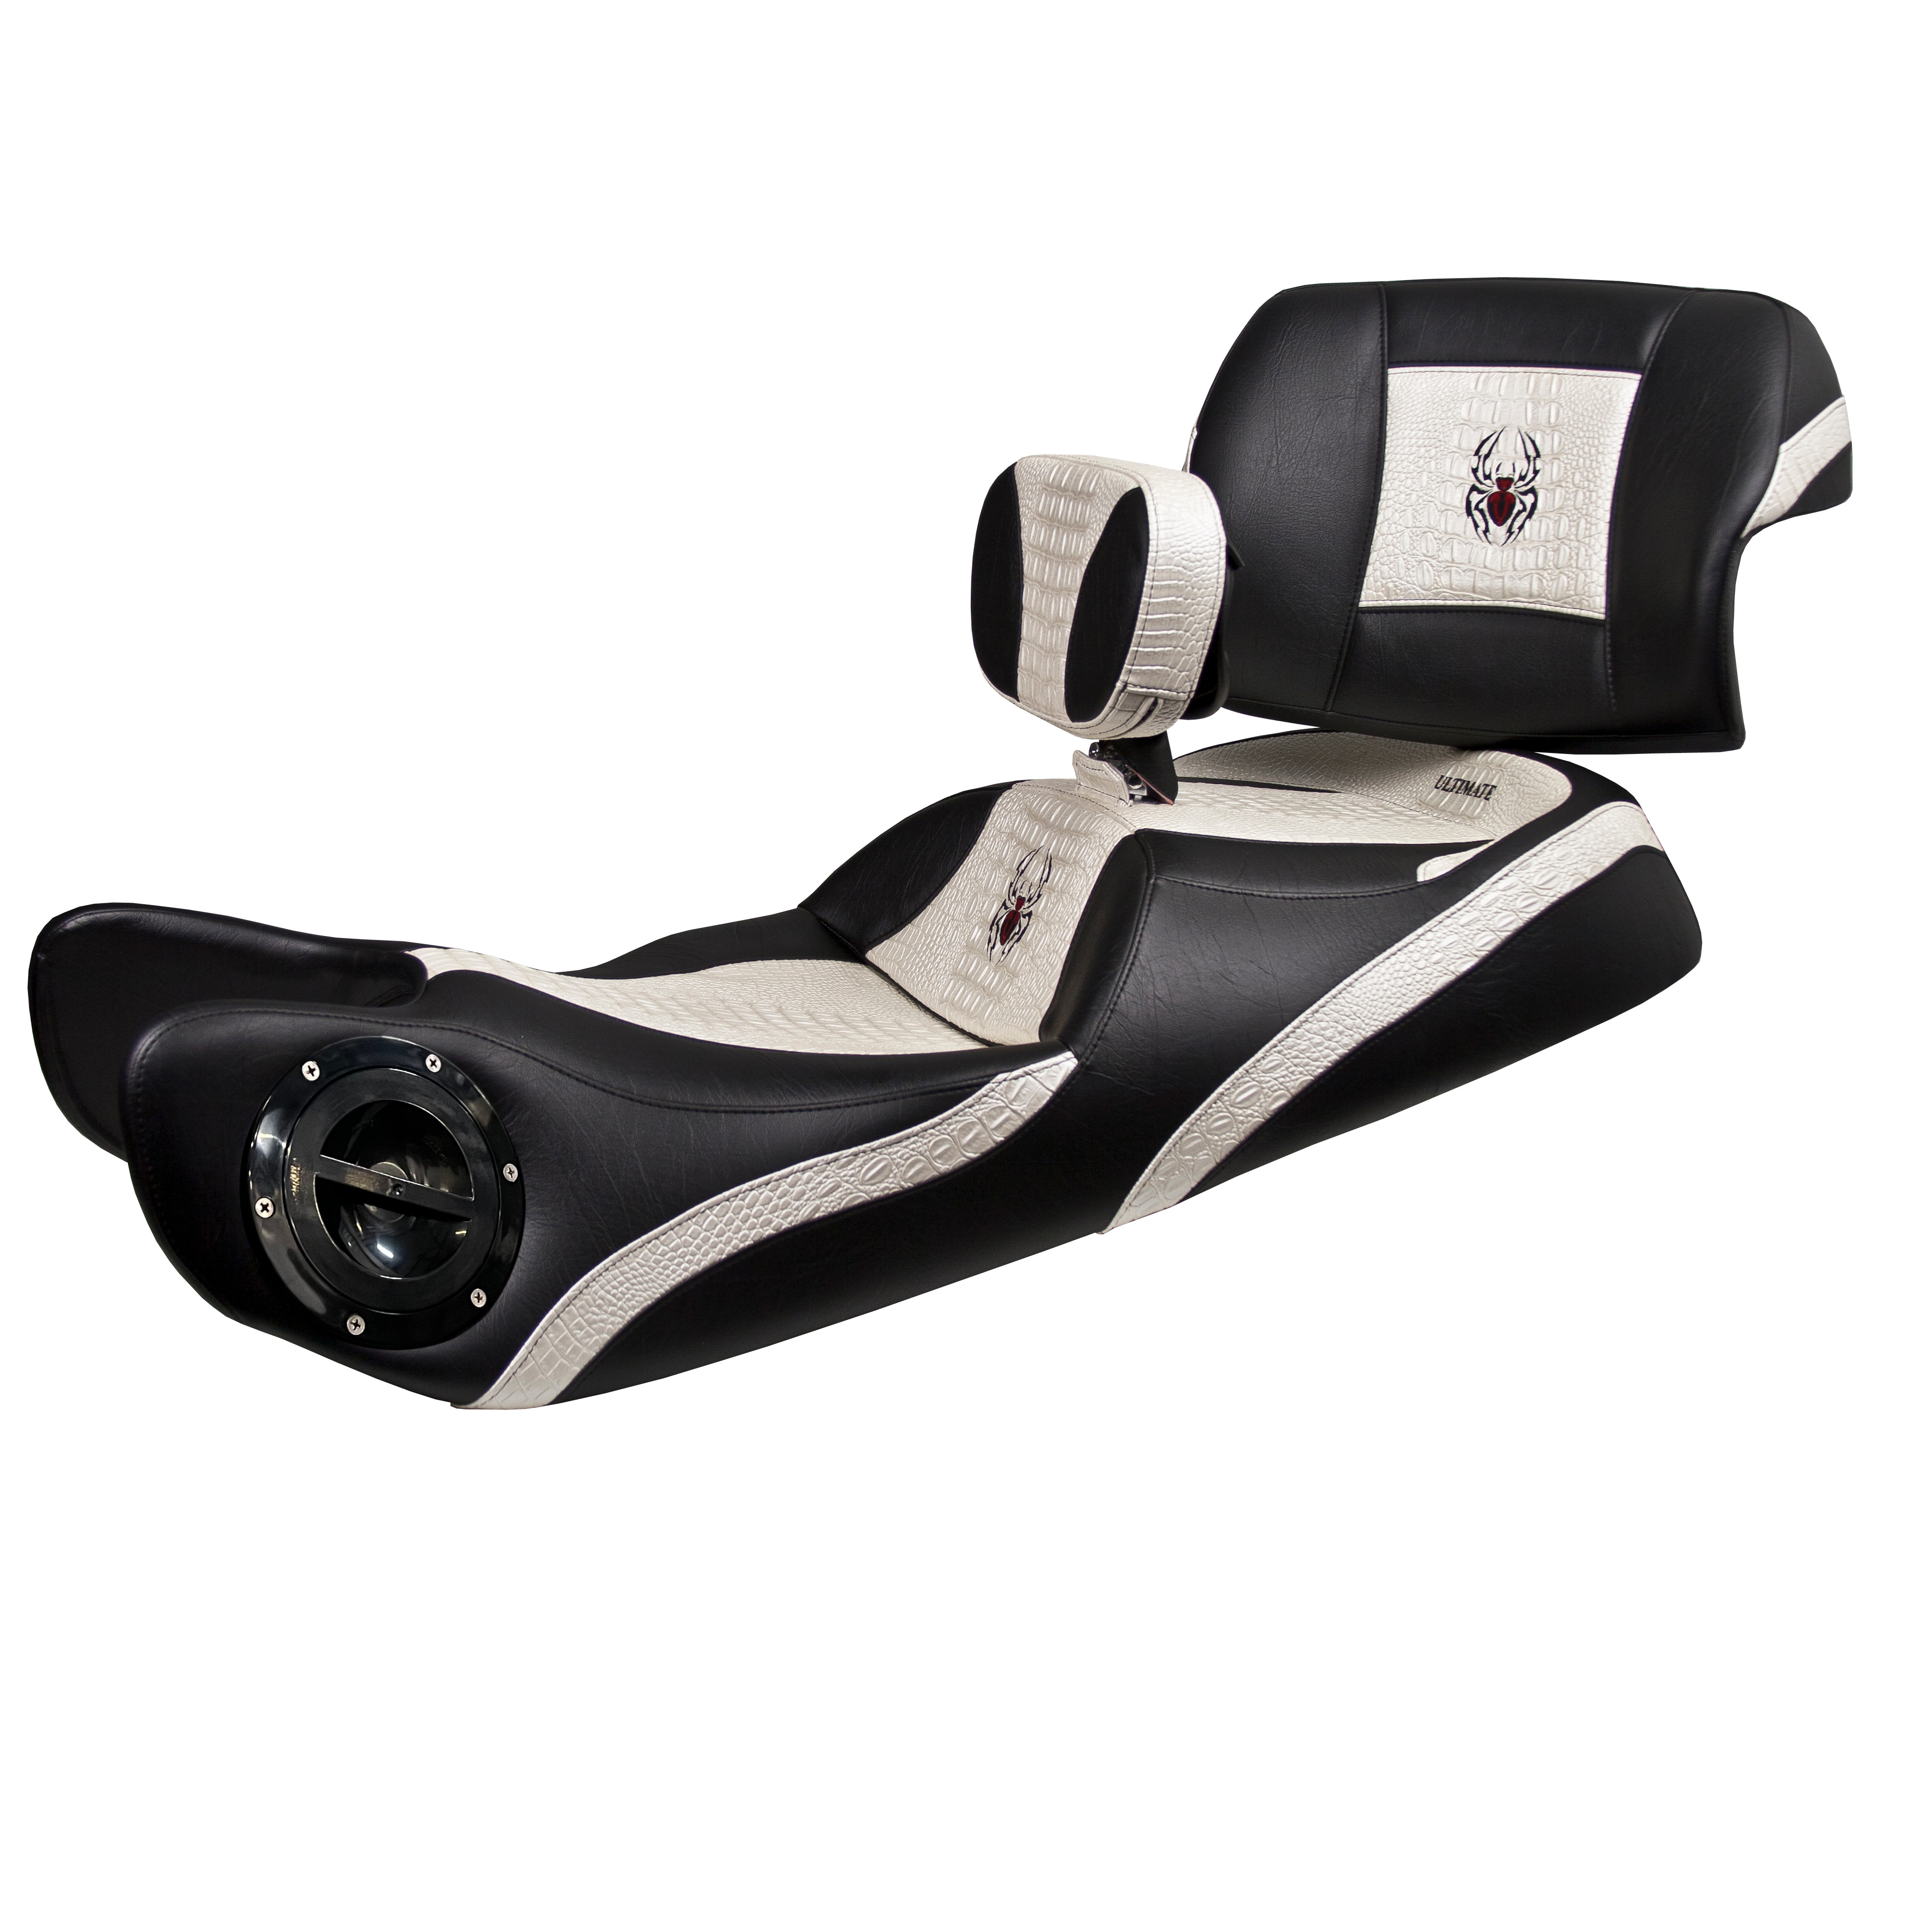 Spyder RT Seat, Driver Backrest and Passenger Backrest - Ultimate Pearl White Croc Inlays, Logos and Fuel Door (2010 - 2019)